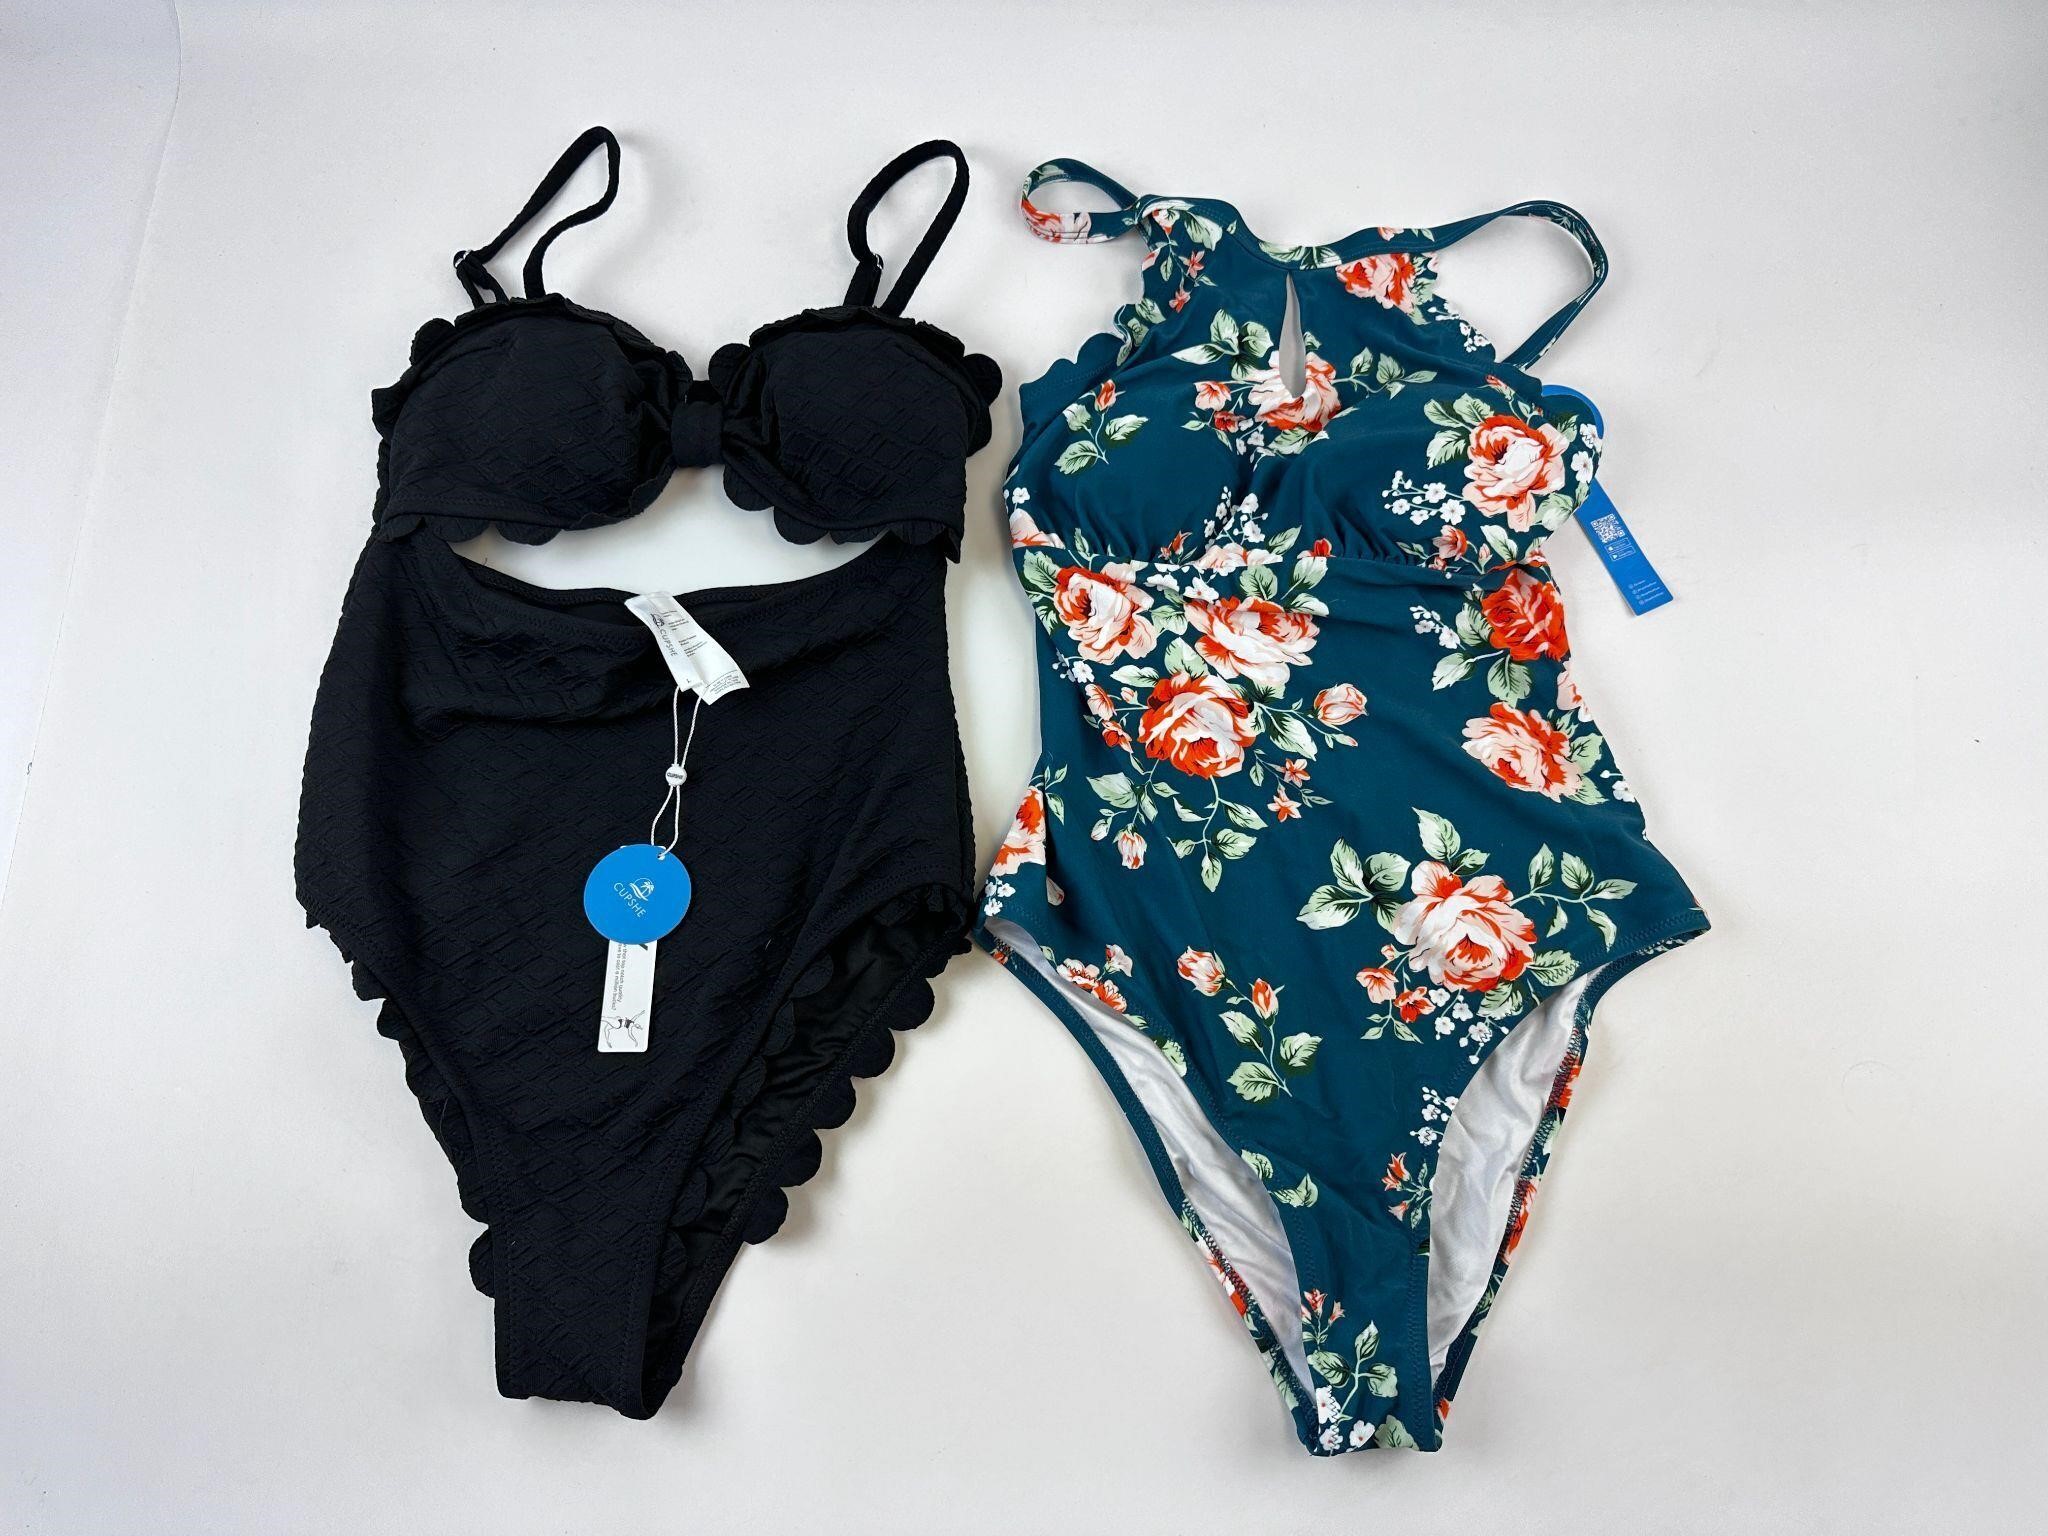 New Cupshe Swimsuits Size Large